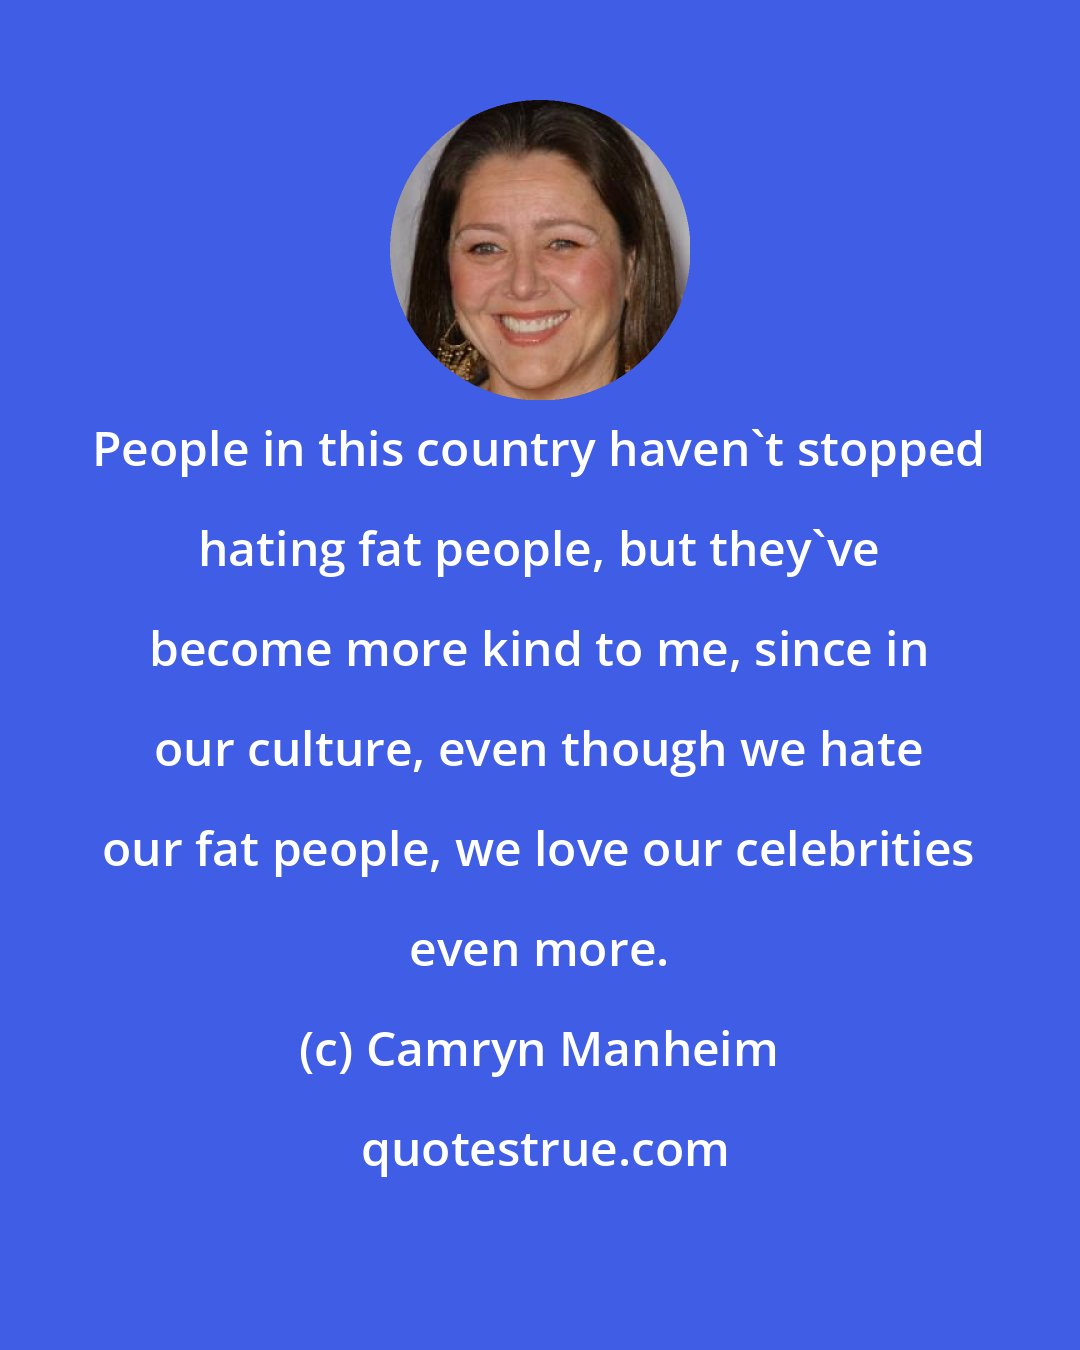 Camryn Manheim: People in this country haven't stopped hating fat people, but they've become more kind to me, since in our culture, even though we hate our fat people, we love our celebrities even more.